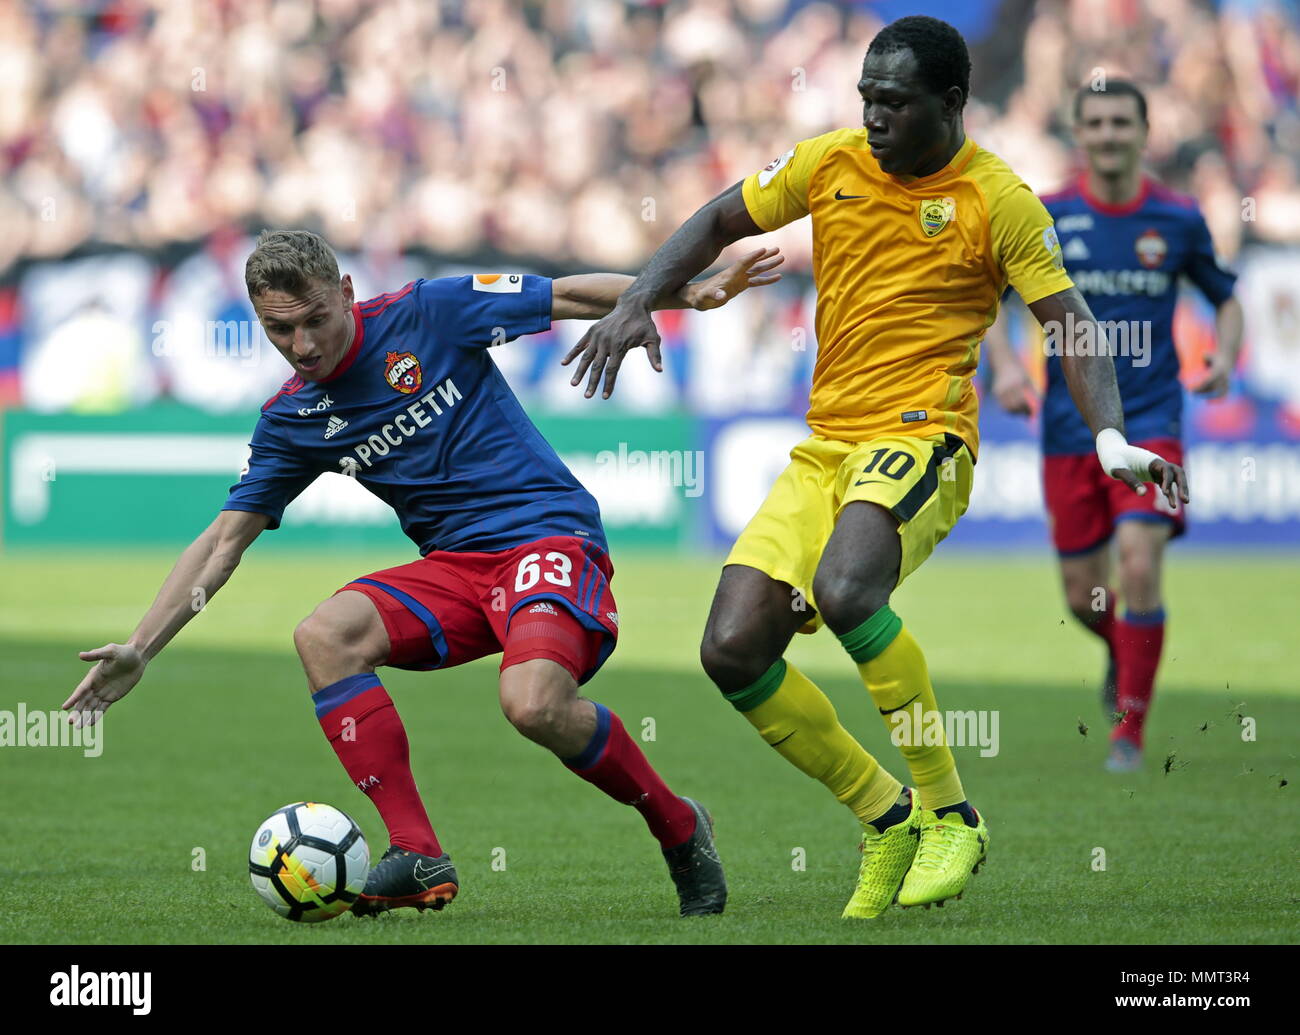 Moscow, Russia. 13th May, 2018. MOSCOW, RUSSIA - MAY 13, 2018: CSKA  Moscow's Fyodor Chalov and Anzhi Makhachkala's Kwadwo Poku (L-R front) in  their 2017/2018 Russian Football Premier League Round 30 match